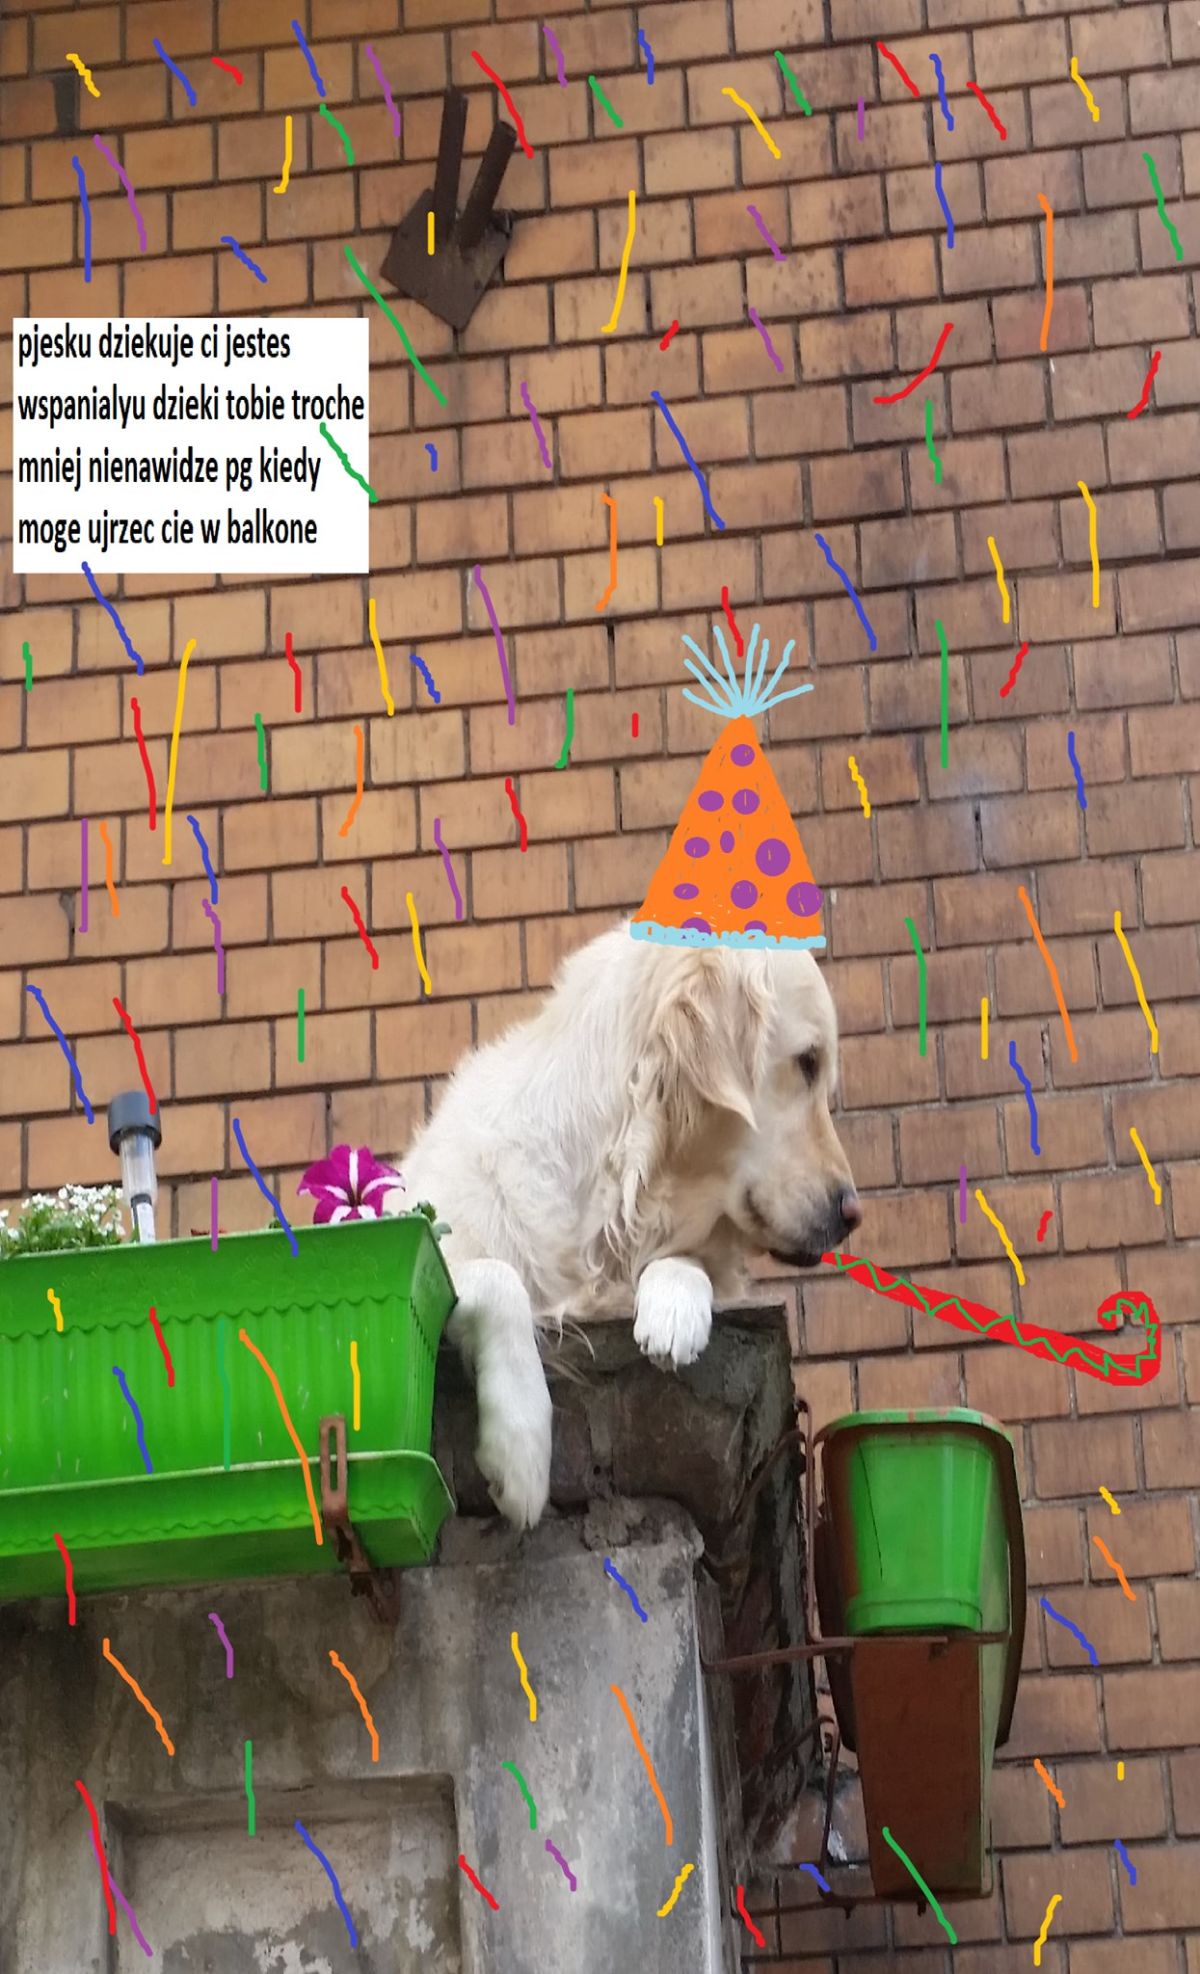 an image of a golden retriever hanging over a balcony photoshopped wearing a party hat and confetti falling around the dog and Polish text in the top corner